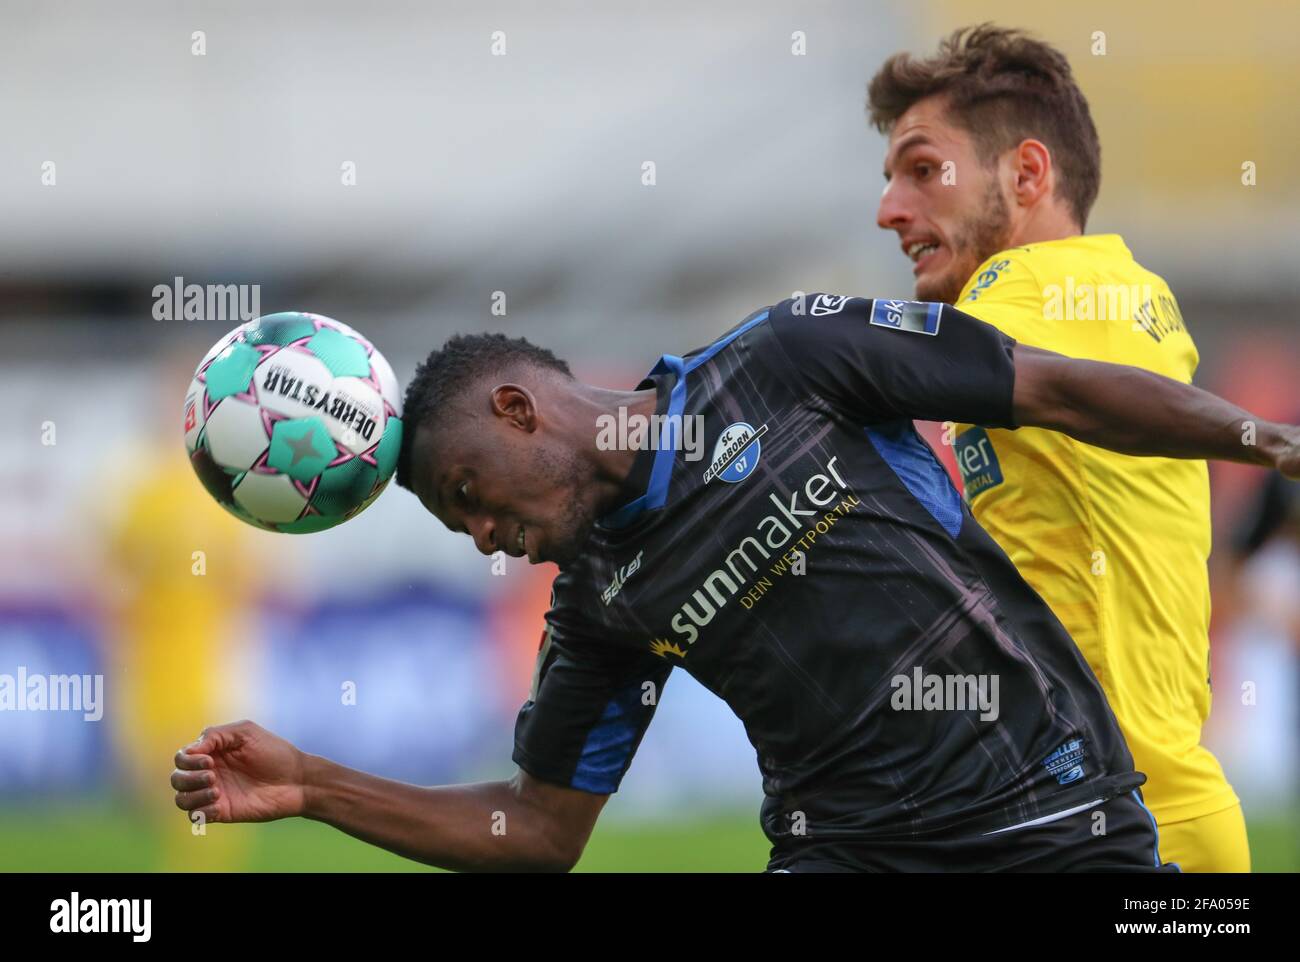 Paderborn, Germany. 21st Apr, 2021. Football: 2nd Bundesliga, SC Paderborn 07 - VfL Osnabrück, Matchday 30 at Benteler-Arena. Paderborn's Jamilu Collins (l) fights for the ball with Osnabrück's Bashkim Ajdini (r). Credit: Friso Gentsch/dpa - IMPORTANT NOTE: In accordance with the regulations of the DFL Deutsche Fußball Liga and/or the DFB Deutscher Fußball-Bund, it is prohibited to use or have used photographs taken in the stadium and/or of the match in the form of sequence pictures and/or video-like photo series./dpa/Alamy Live News Stock Photo